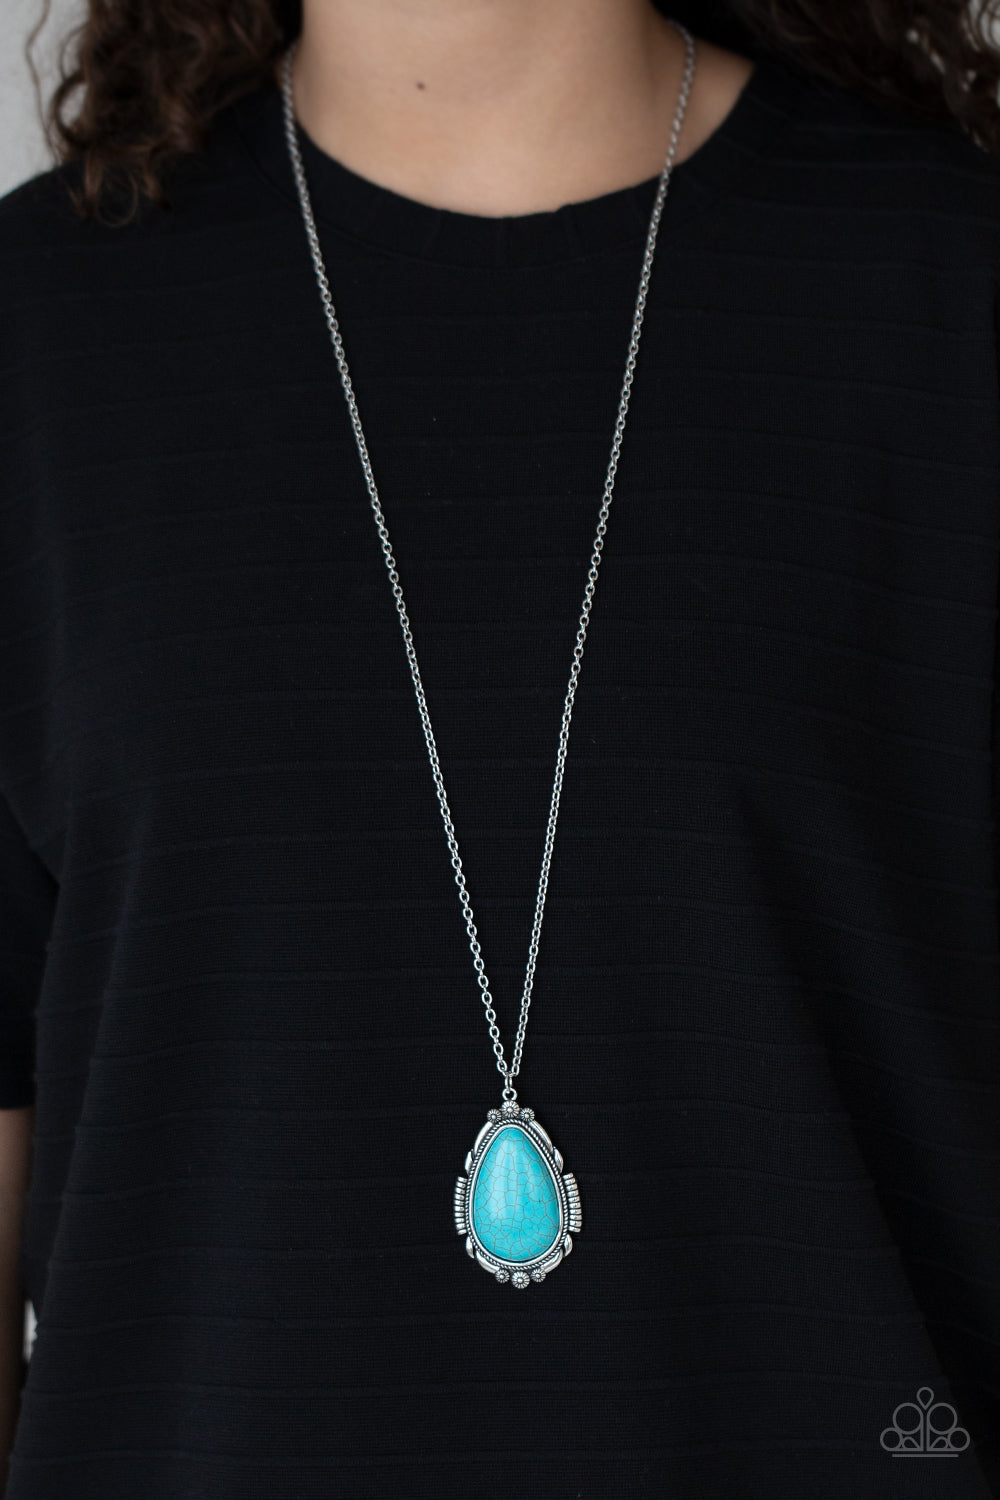 Paparazzi Western Fable - Blue turquoise PRE ORDER - $5 Jewelry with Ashley Swint